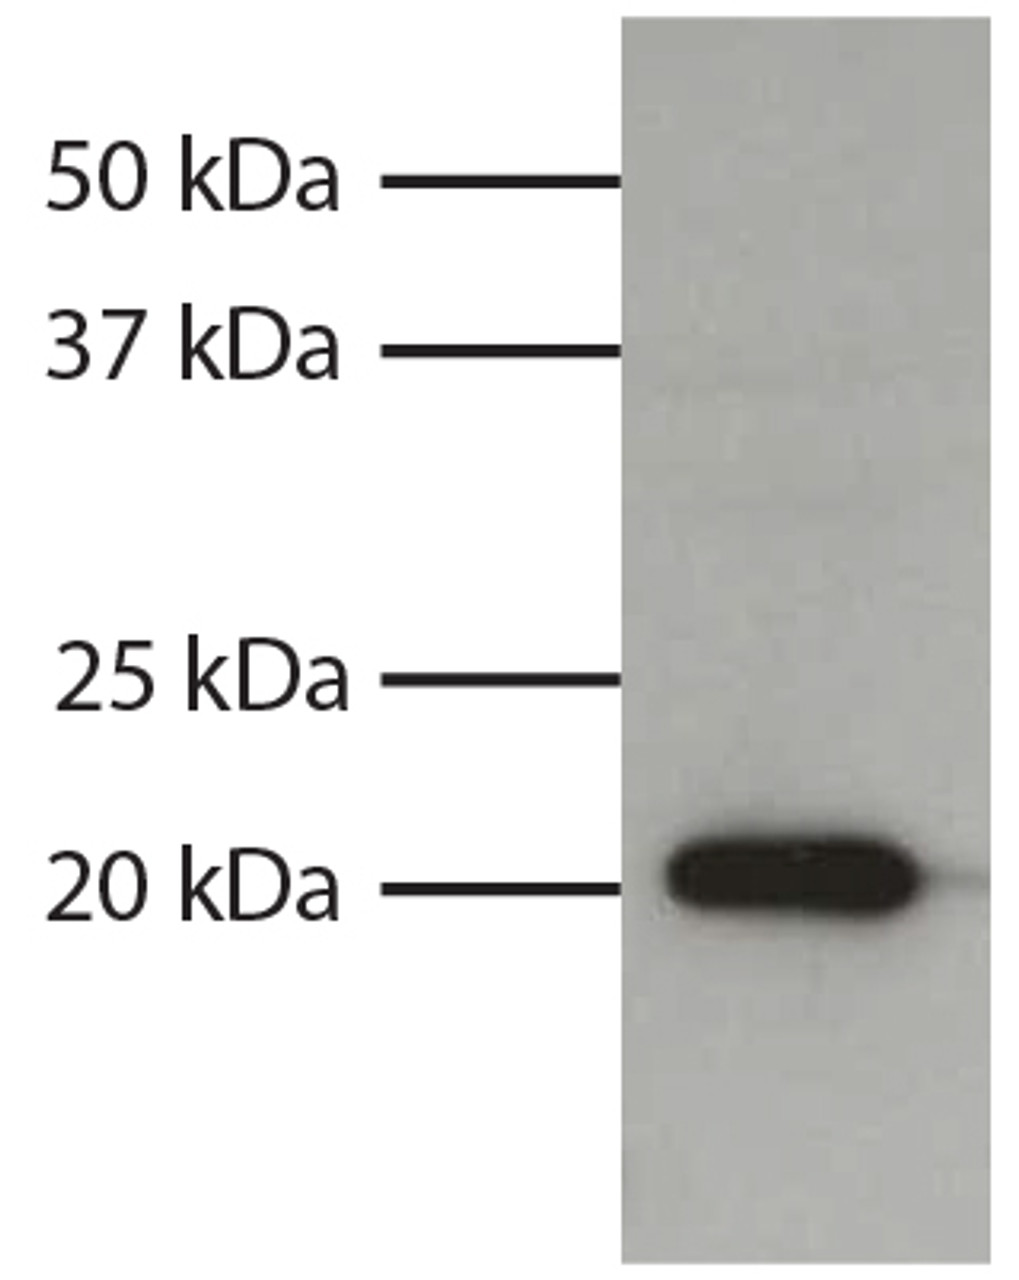 Total cell lysates from HL60 cells were resolved by electrophoresis, transferred to PVDF membrane, and probed with Mouse Anti-Human Bax-UNLB (Cat. No. 99-622) . Proteins were visualized using Goat Anti-Mouse IgG1, Human ads-HRP secondary antibody and chemiluminescent detection.